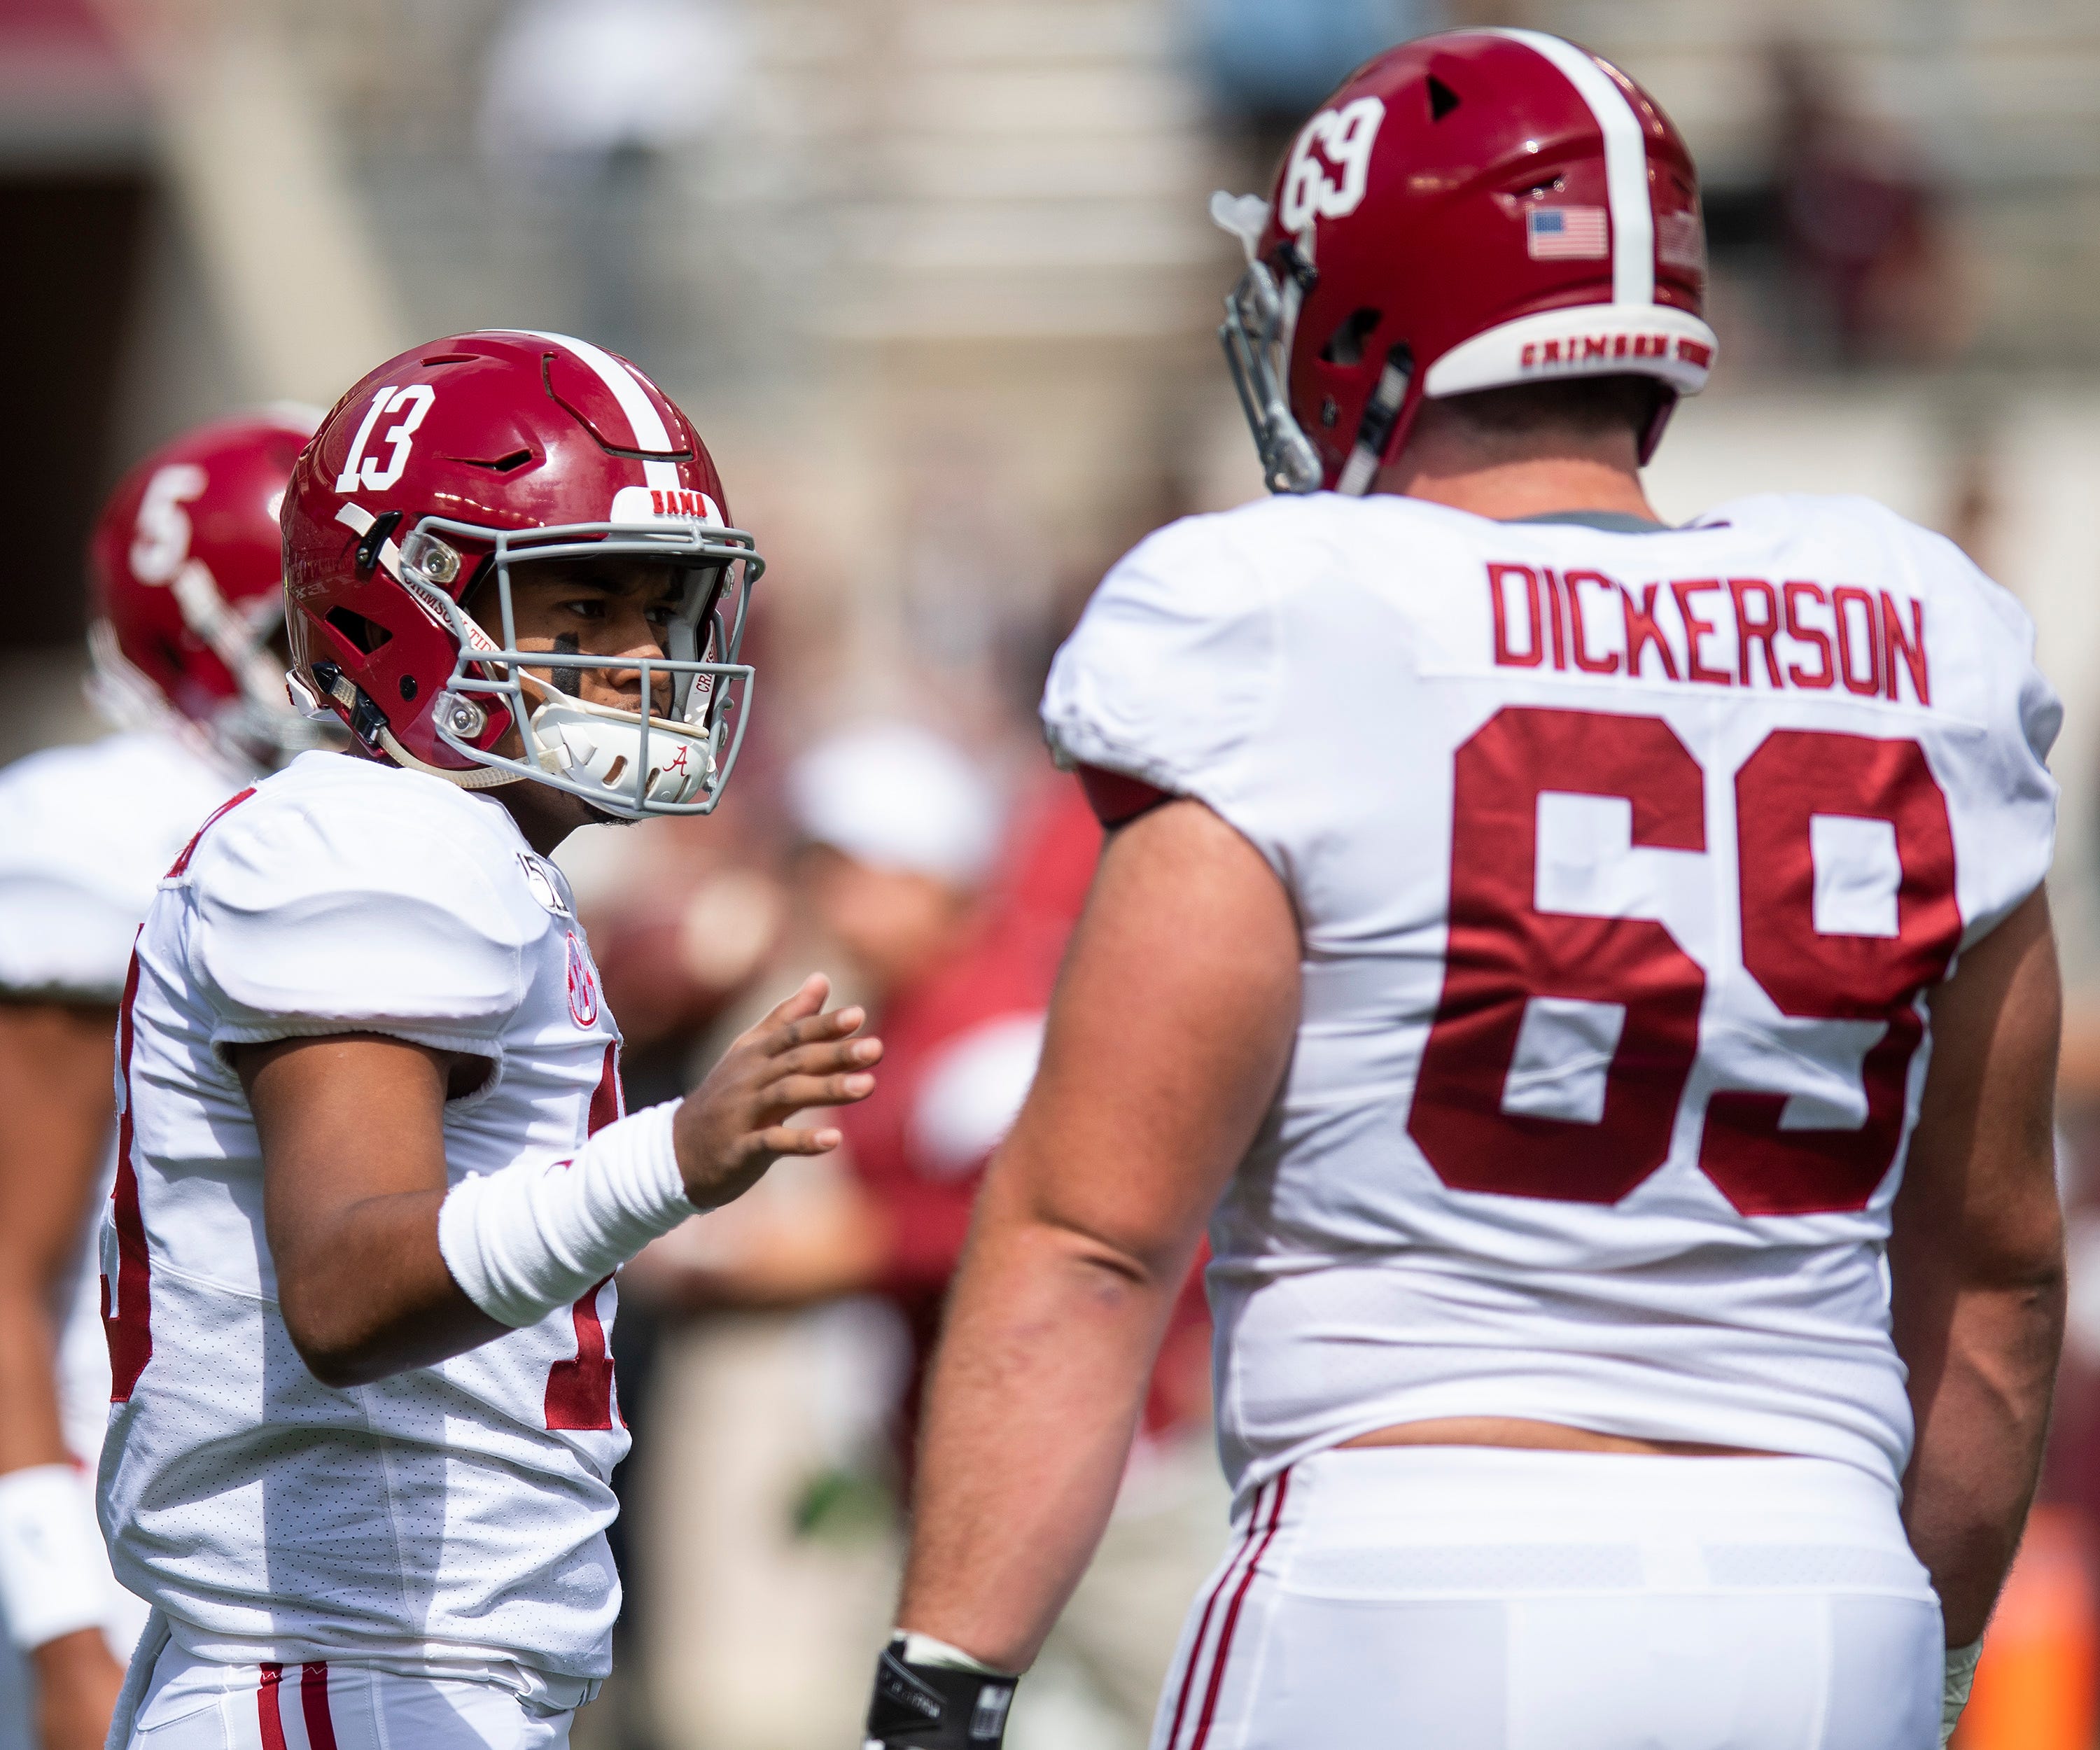 Alabama quarterback Tua Tagovailoa (13) talks with offensive lineman Landon Dickerson (69) before the Texas A&M game at Kyle Field in College Station, Texas on Saturday October 12, 2019.